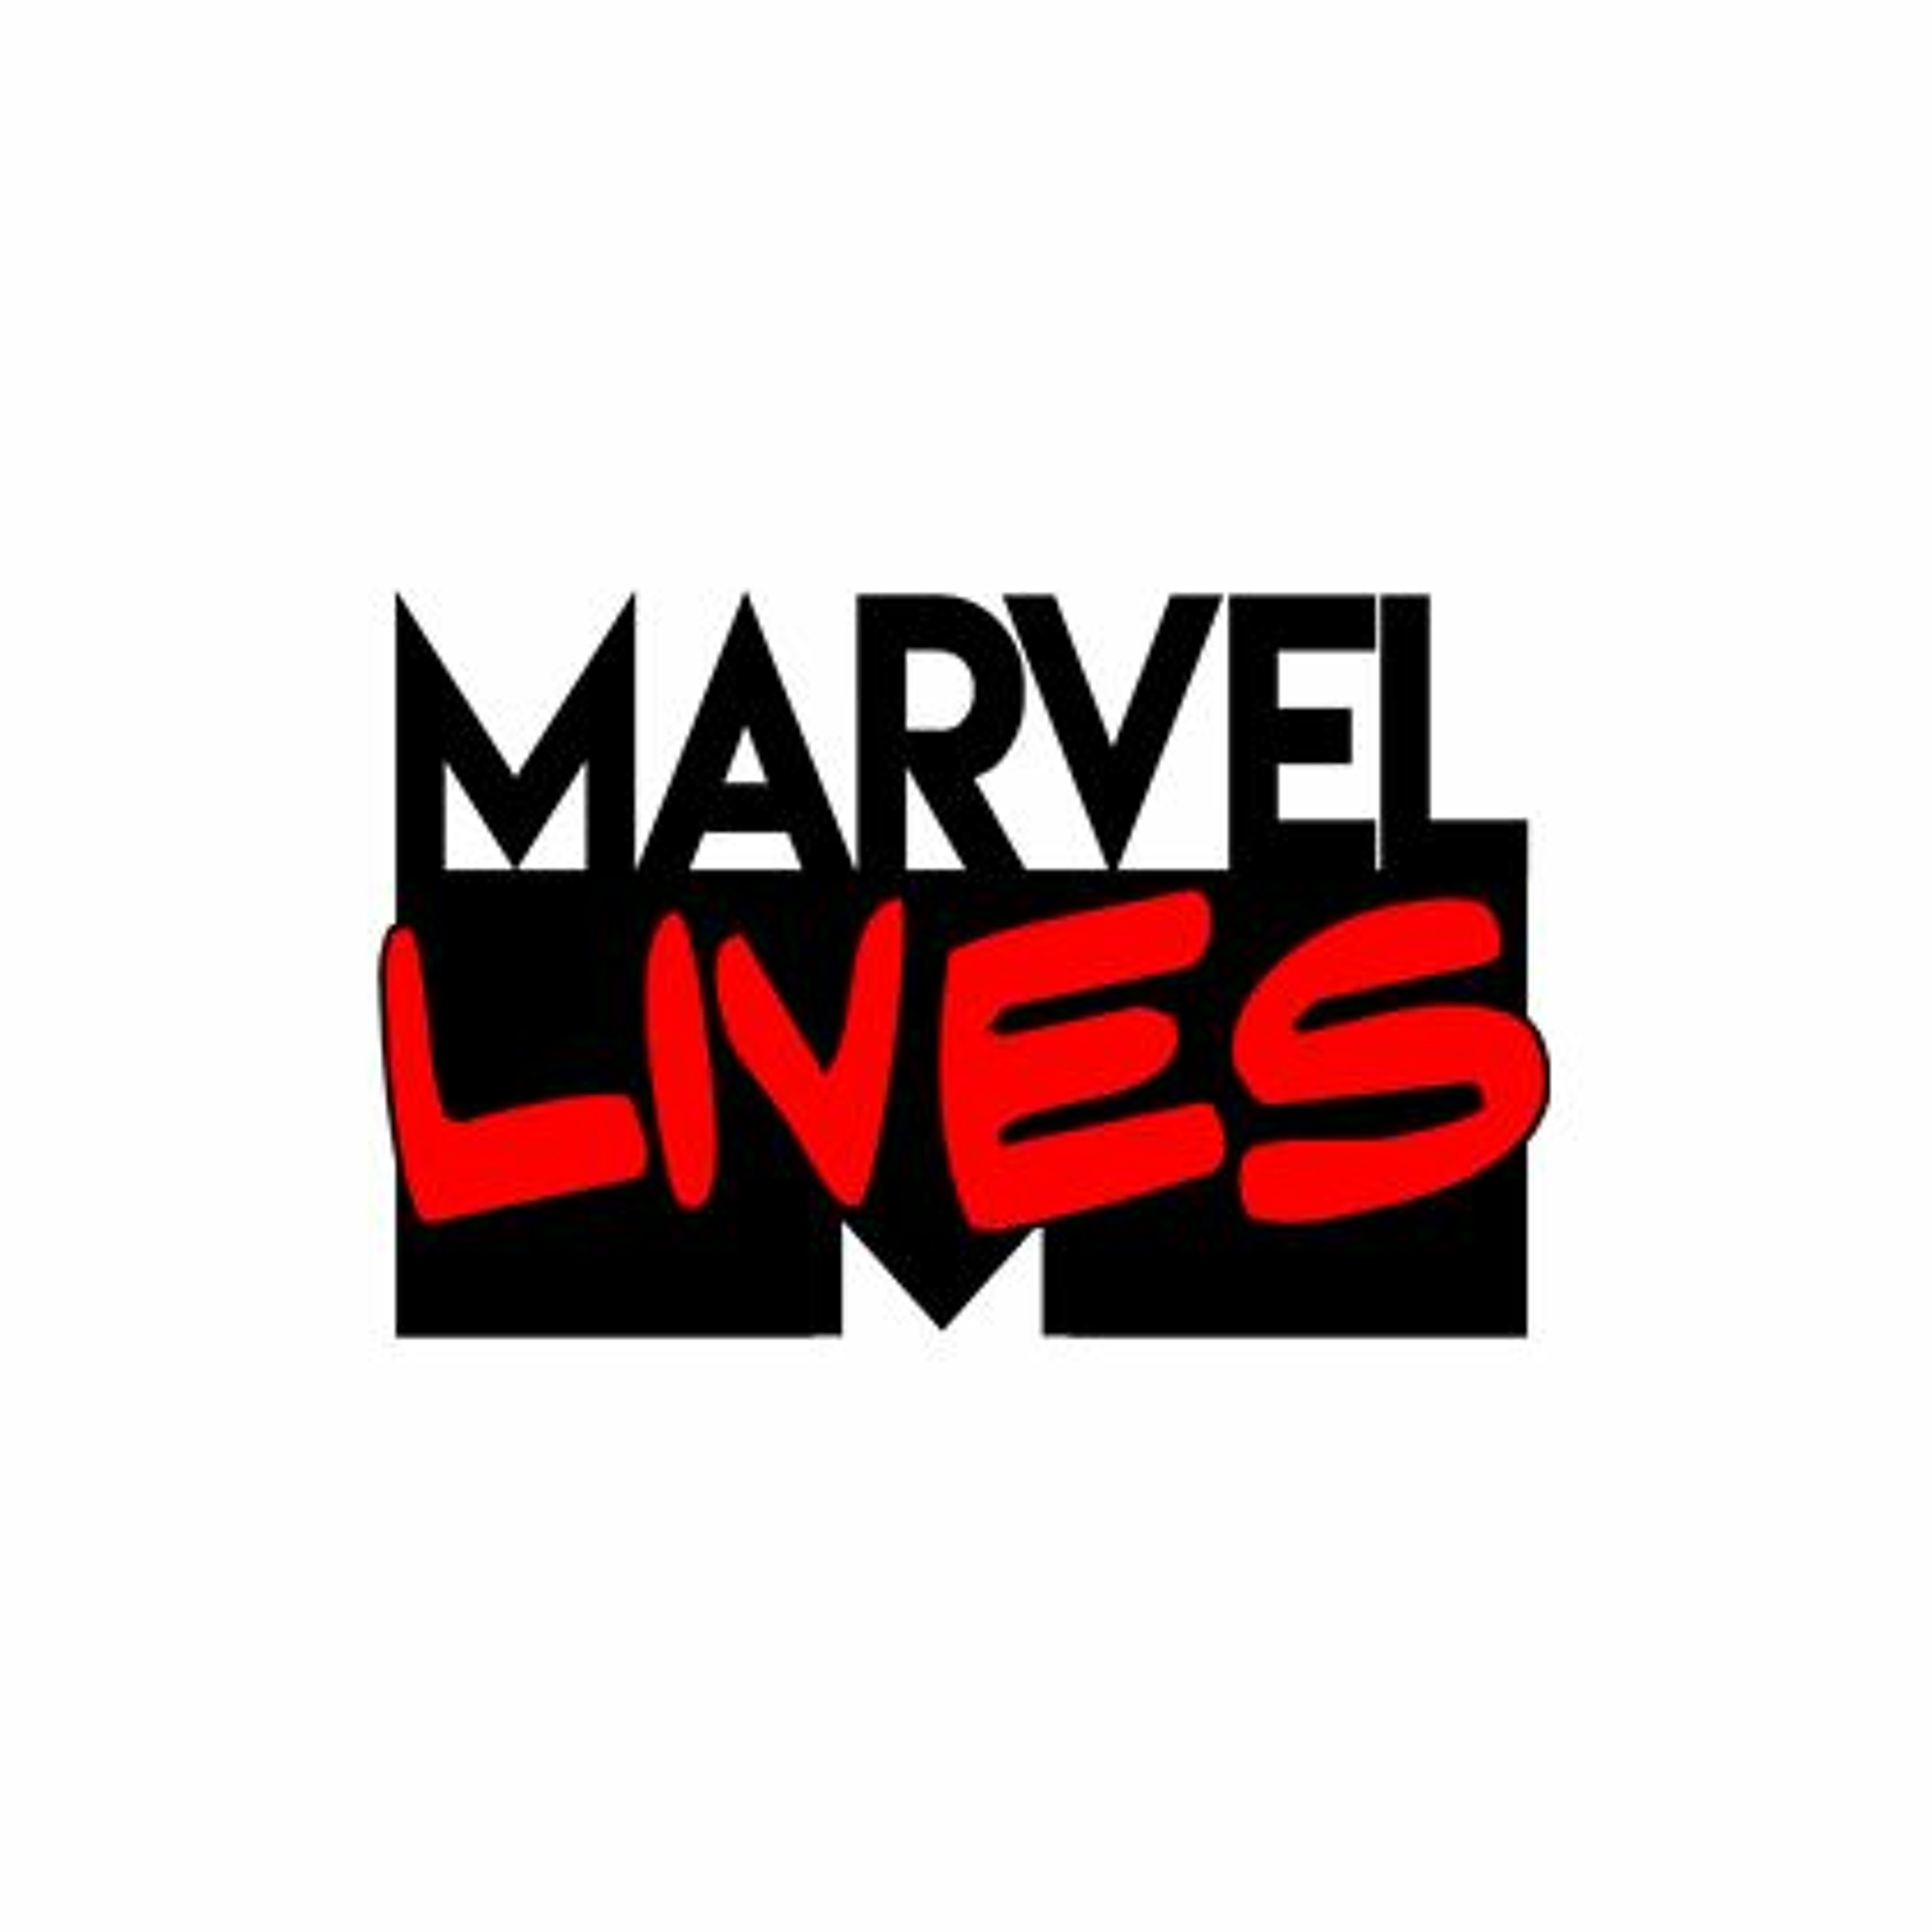 Marvel Lives #14 - Finally at Final Round and UMVC3 Standing Tall